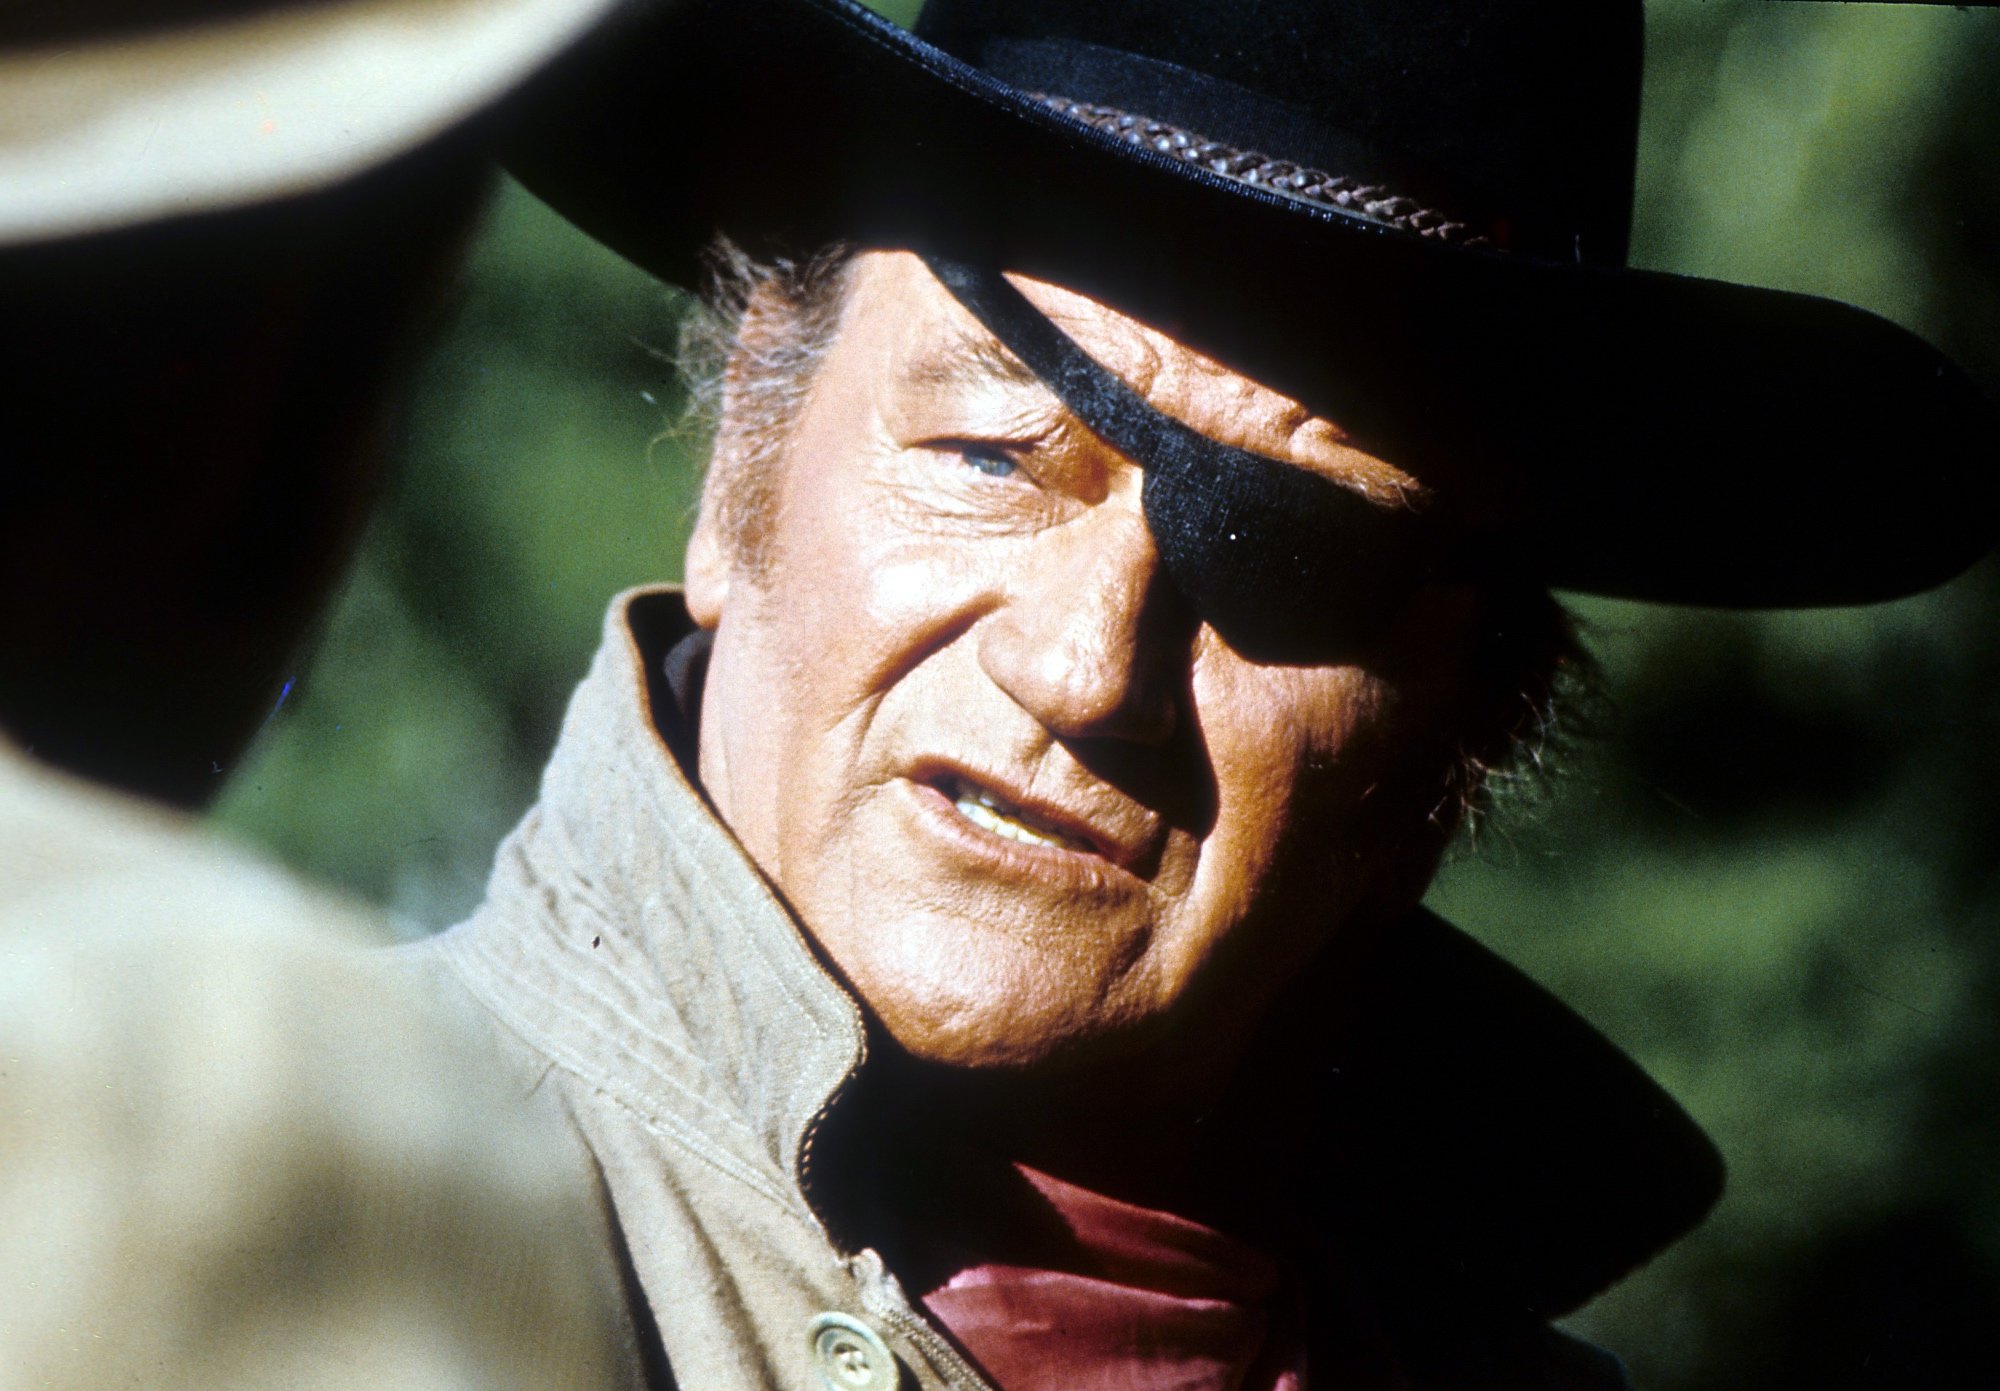 'True Grit' John Wayne as U.S. Marshal Rooster Cogburn in article about fight with Robert Duvall with an eye patch on